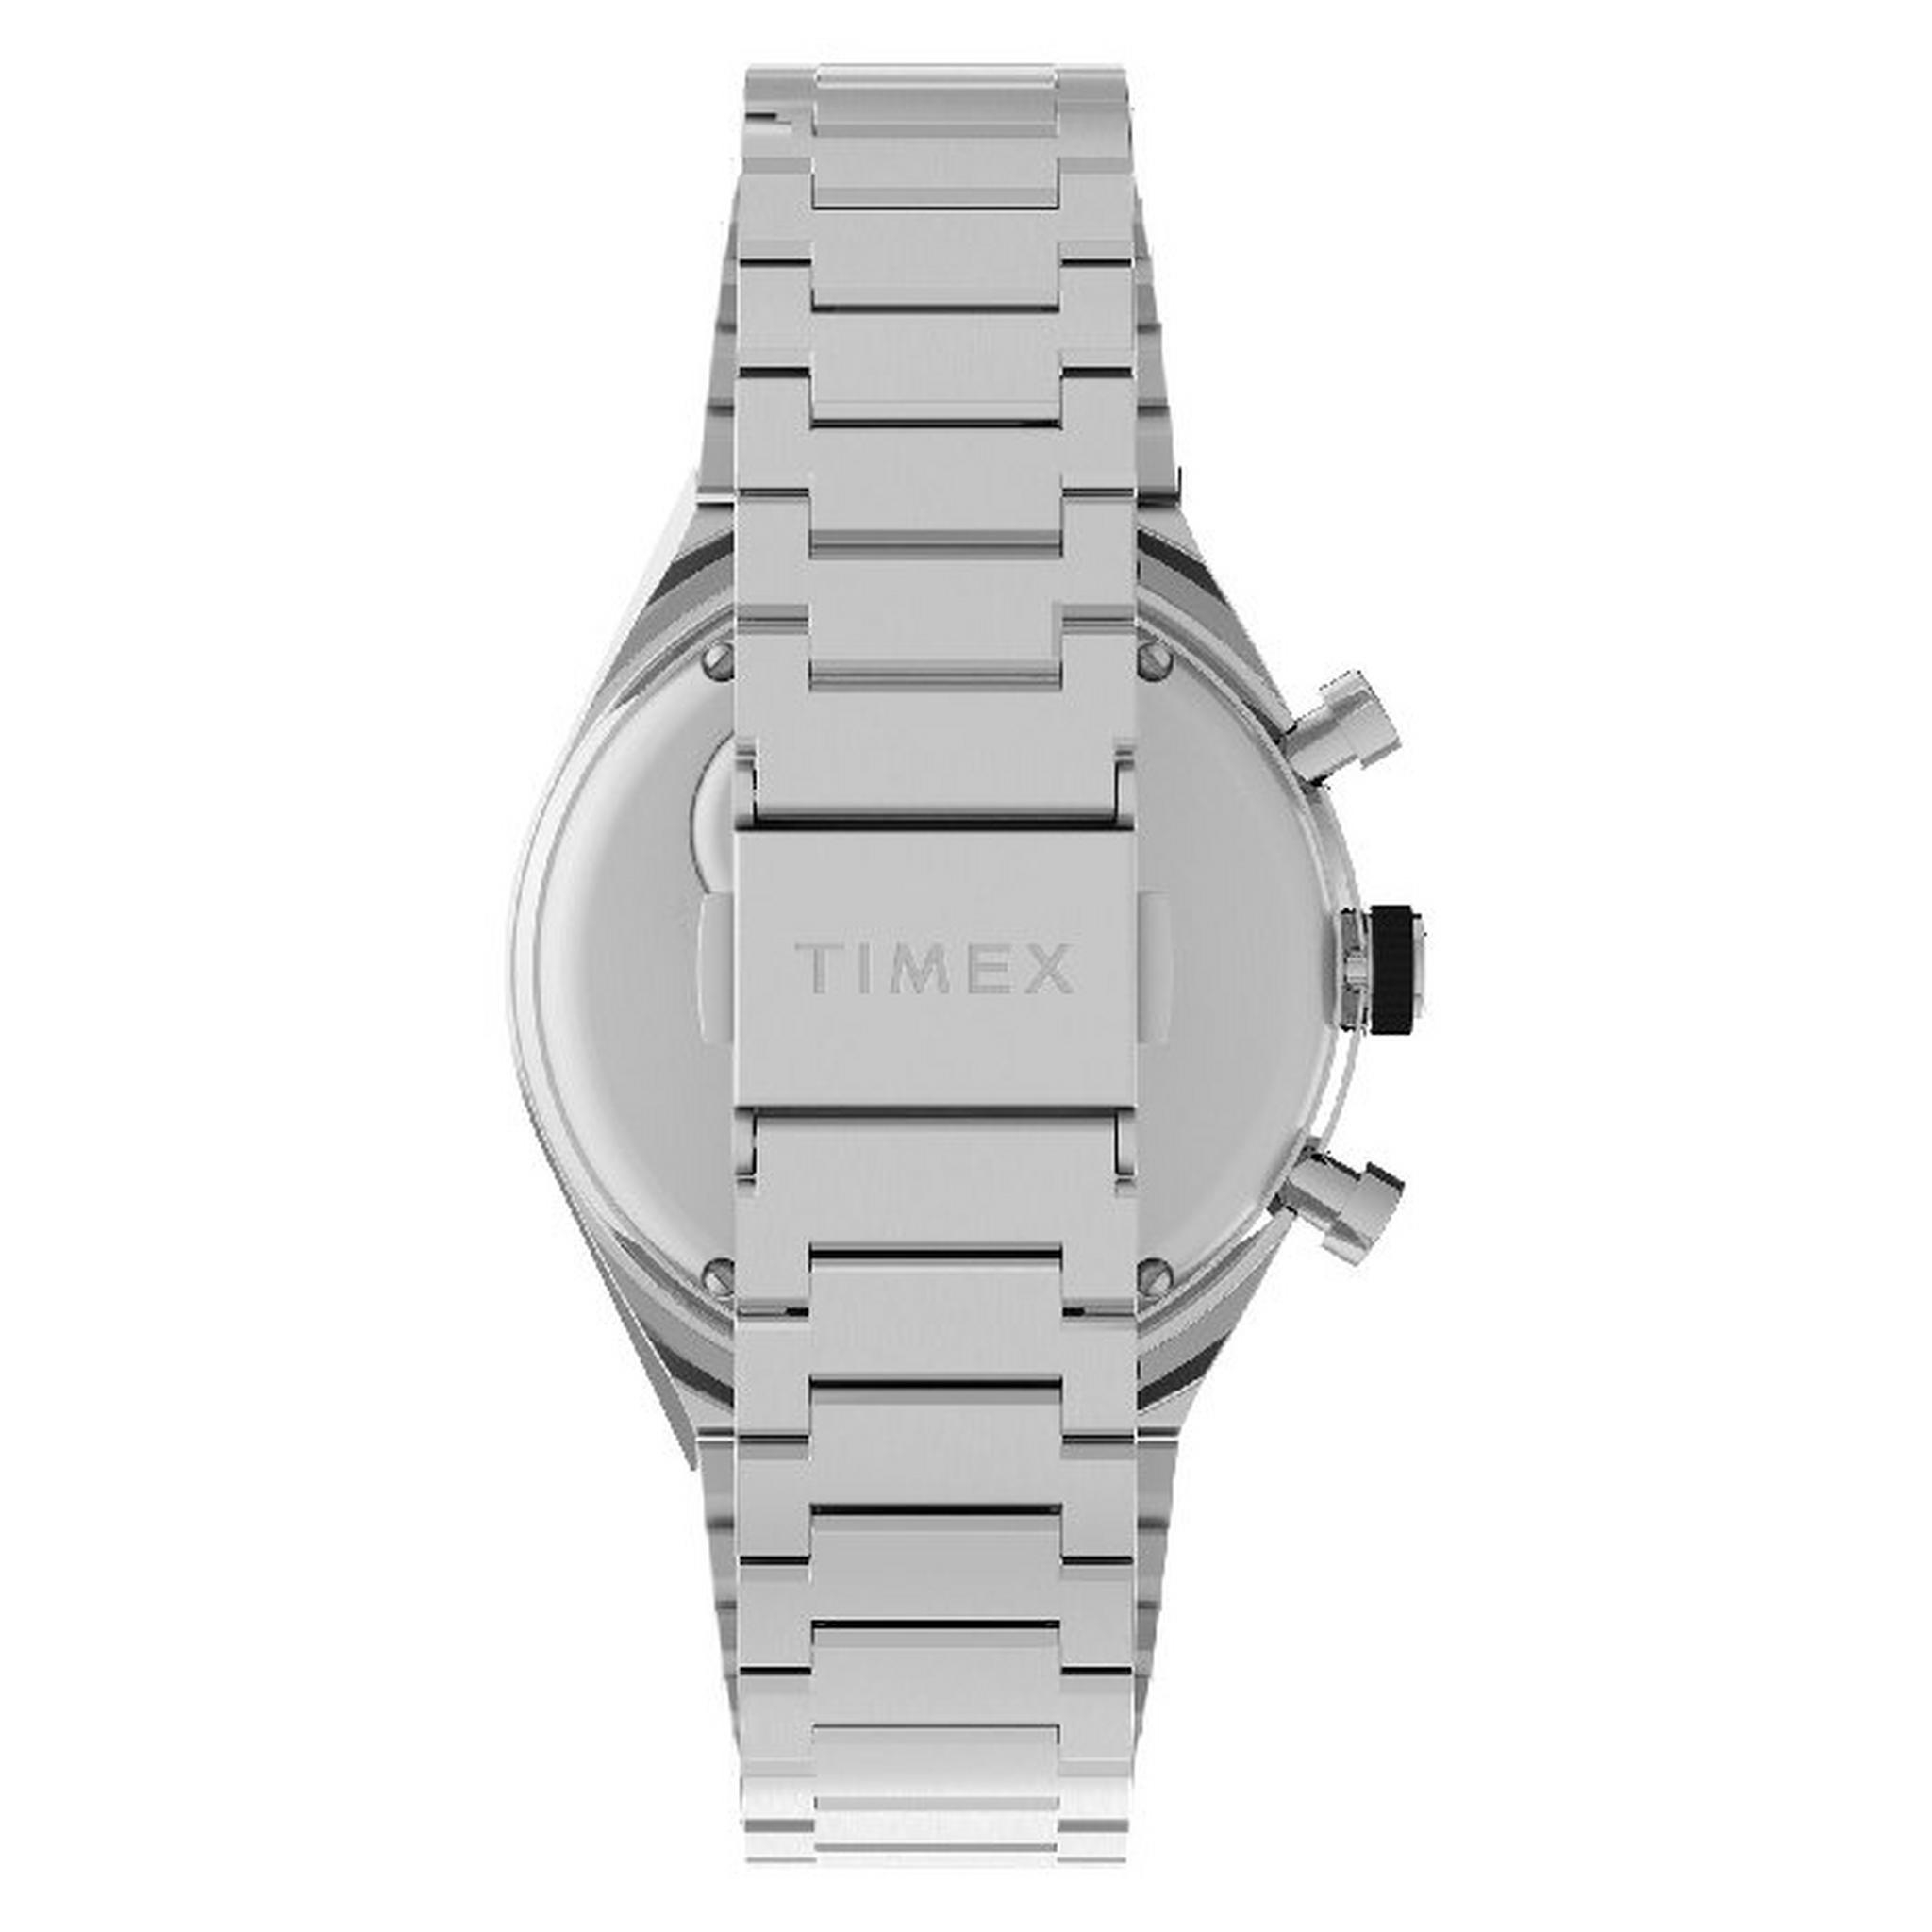 Timex Chronograph Q Gmt Watch for Men, Analog, 40mm, Stainless Steel Strap, TW2V69900 – Silver